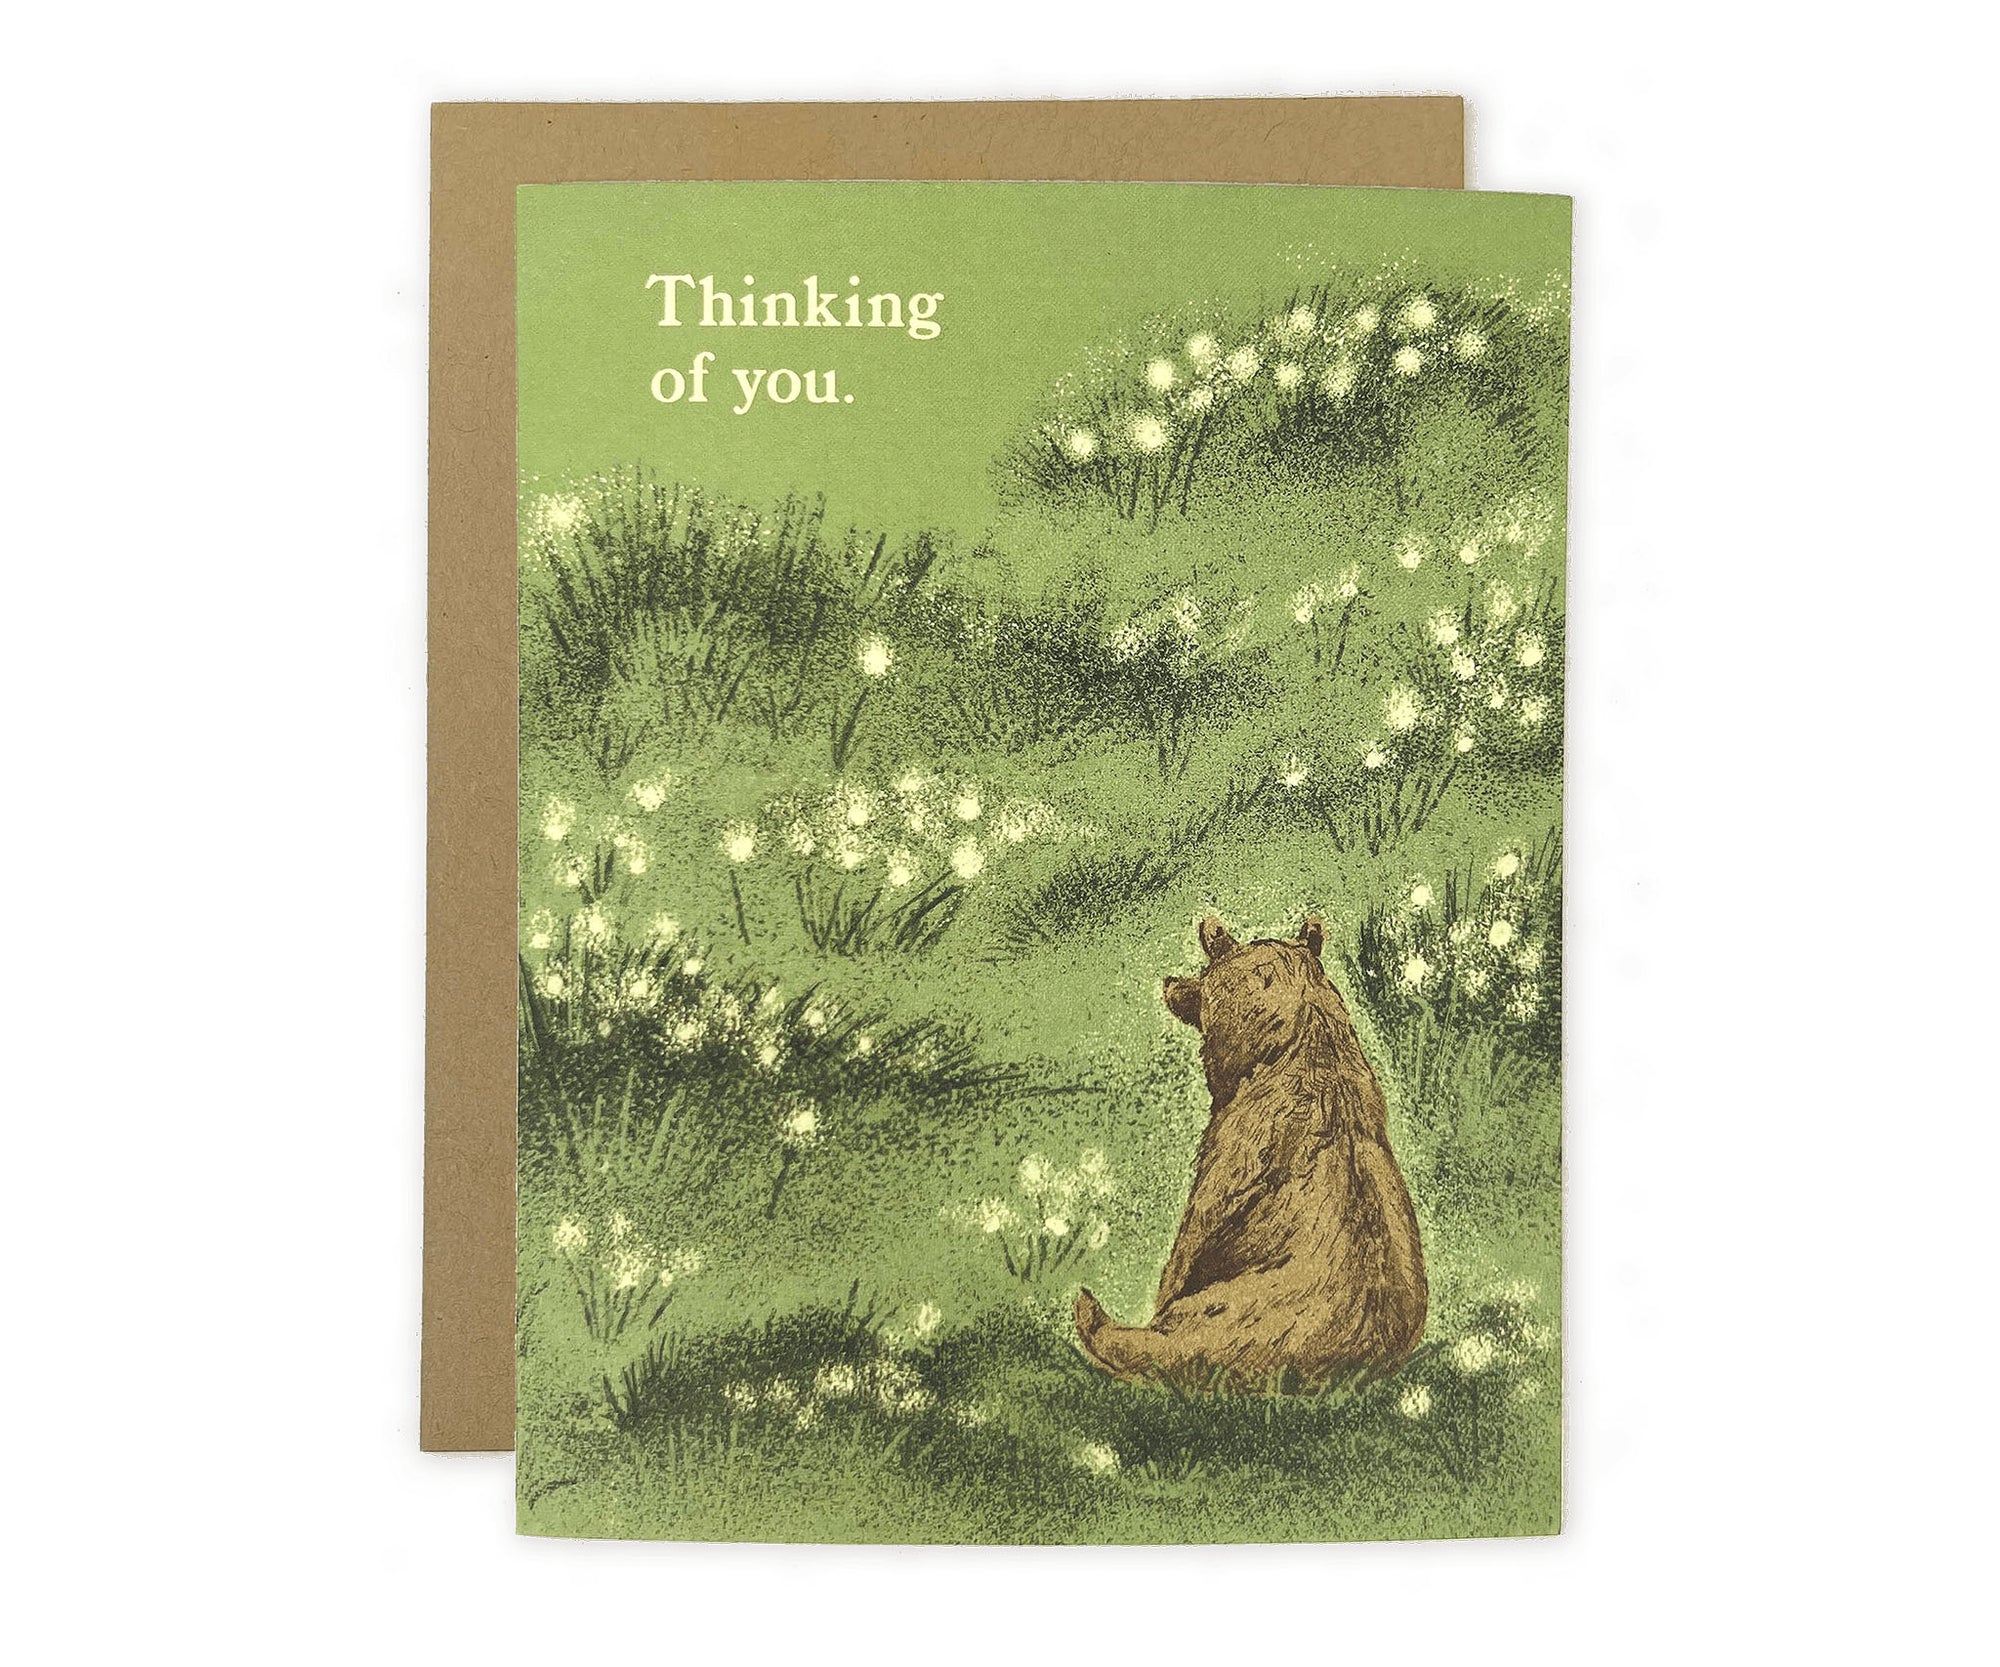 A Thinking of You Bear Greeting Card by The Wild Wander with a bear sitting in a field of dandelions.